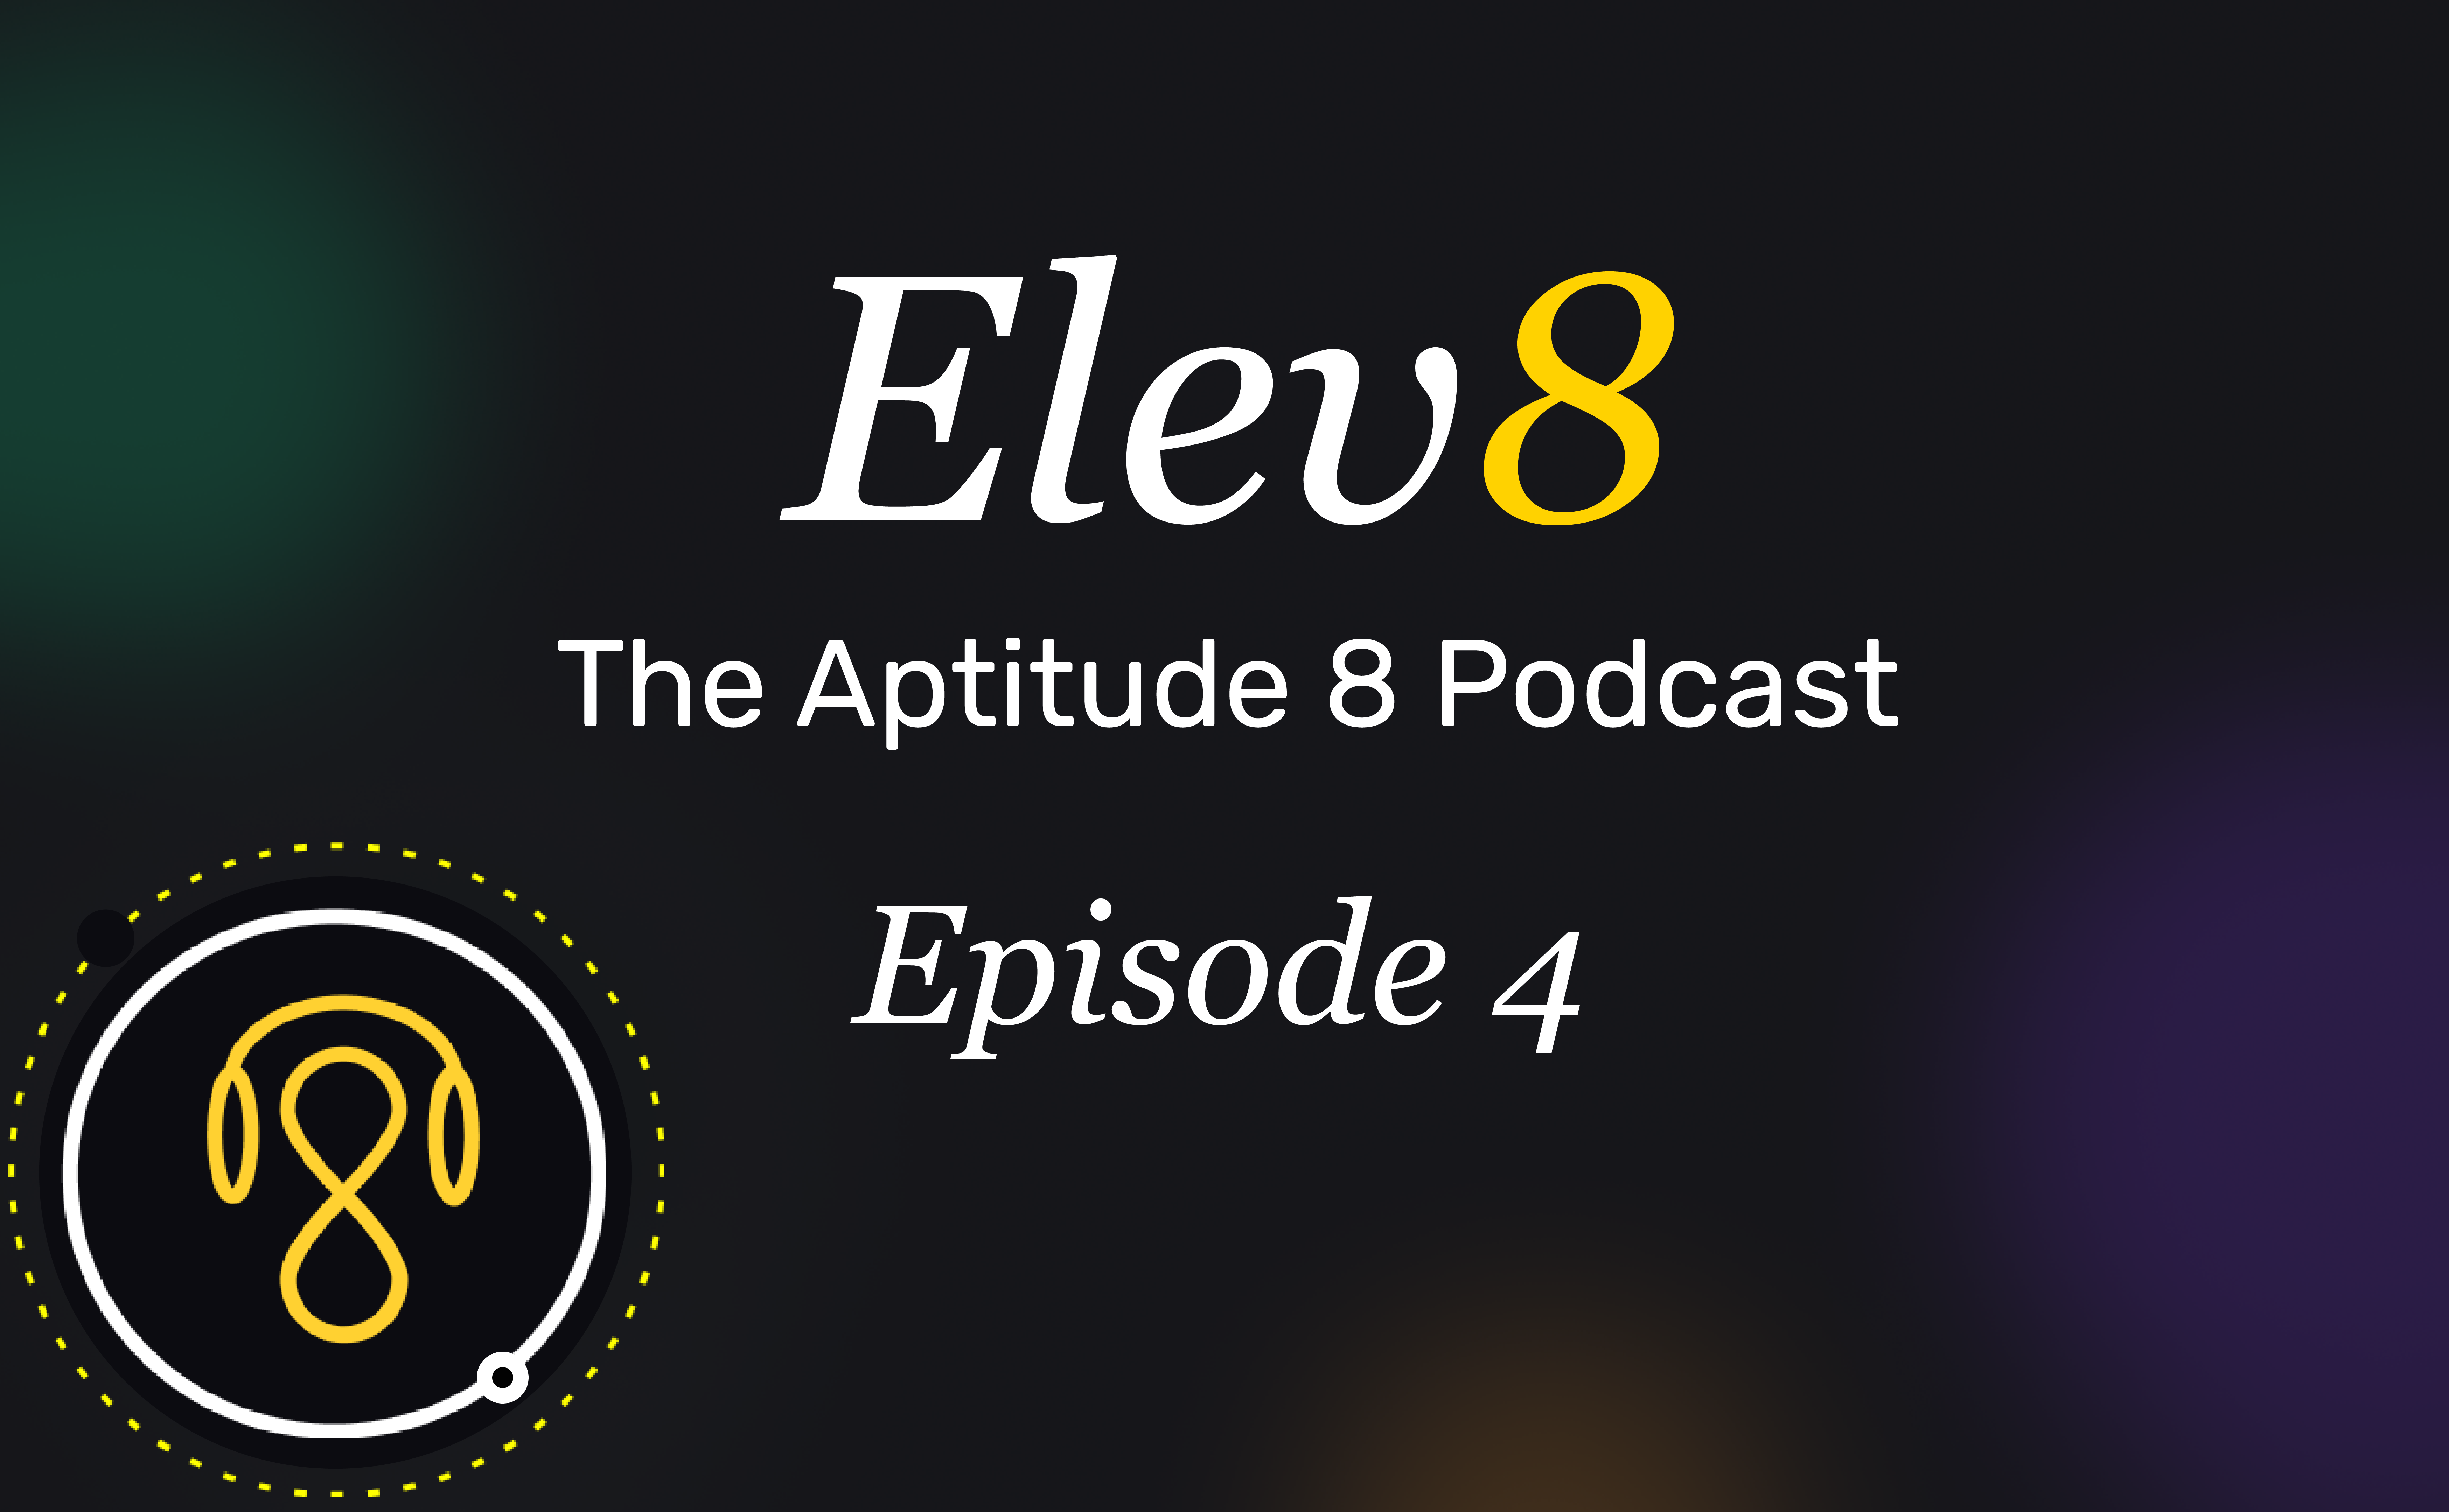 Elev8 Episode 4: Life At HubSpot With Max Cohen